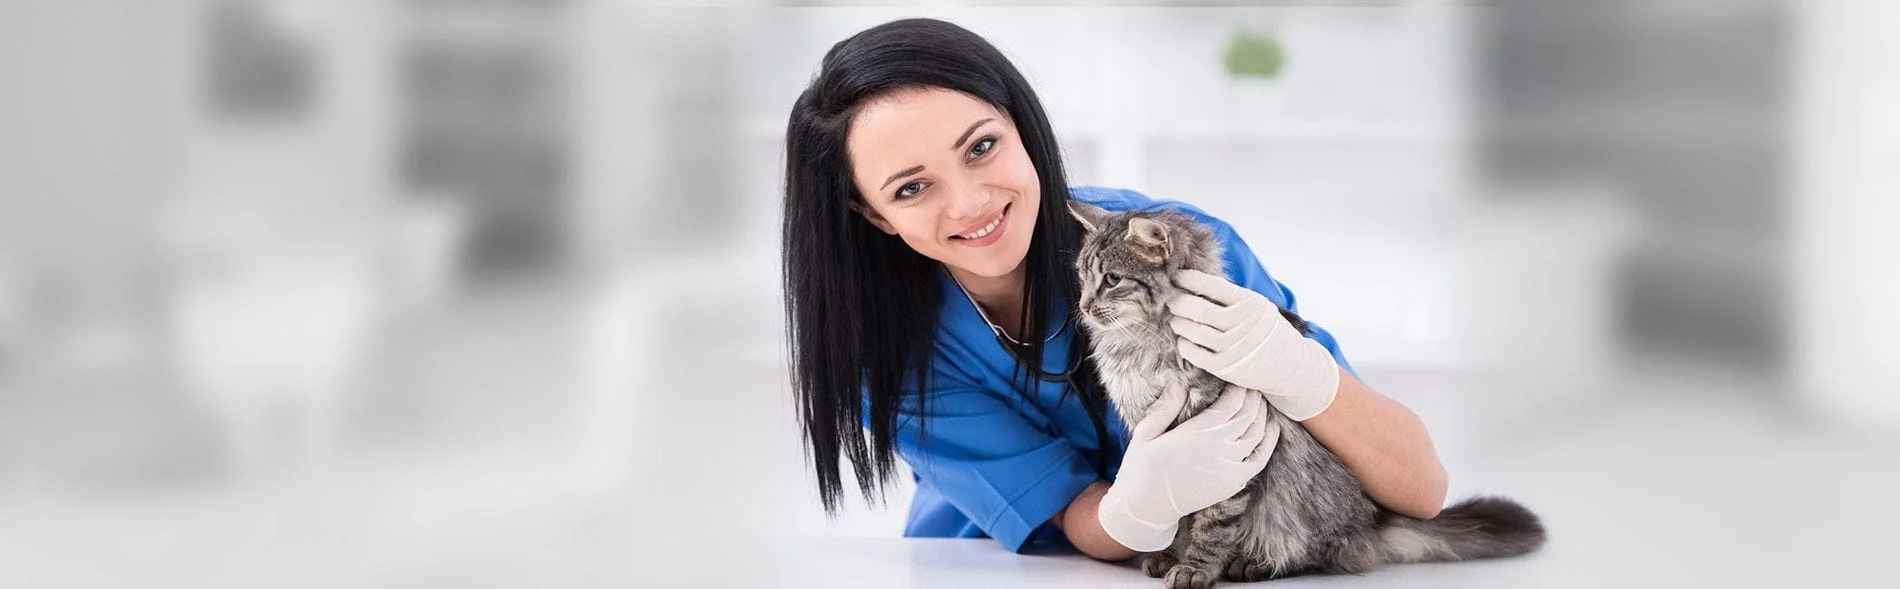 Grand Park Animal Clinic - Your Veterinarian in Katy, TX